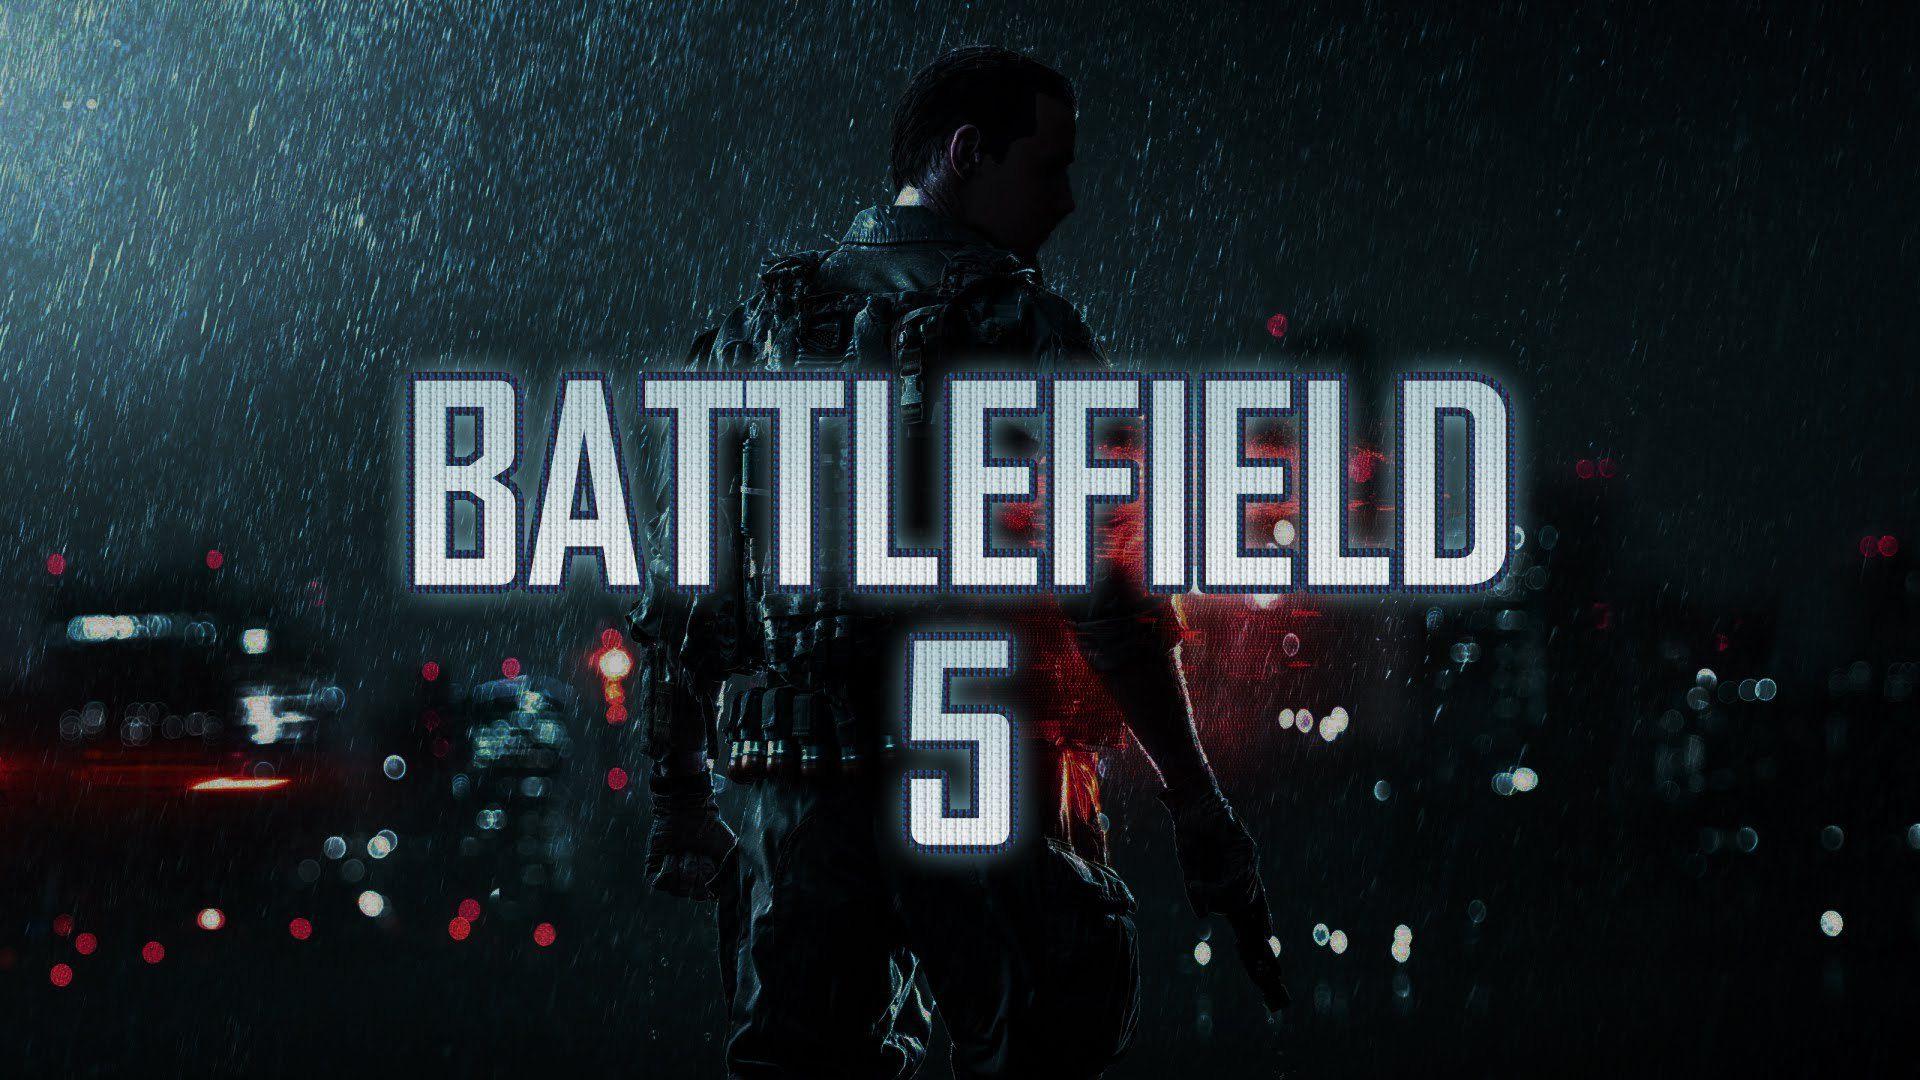 Battlefield 5 Wallpaper Image Photo Picture Background